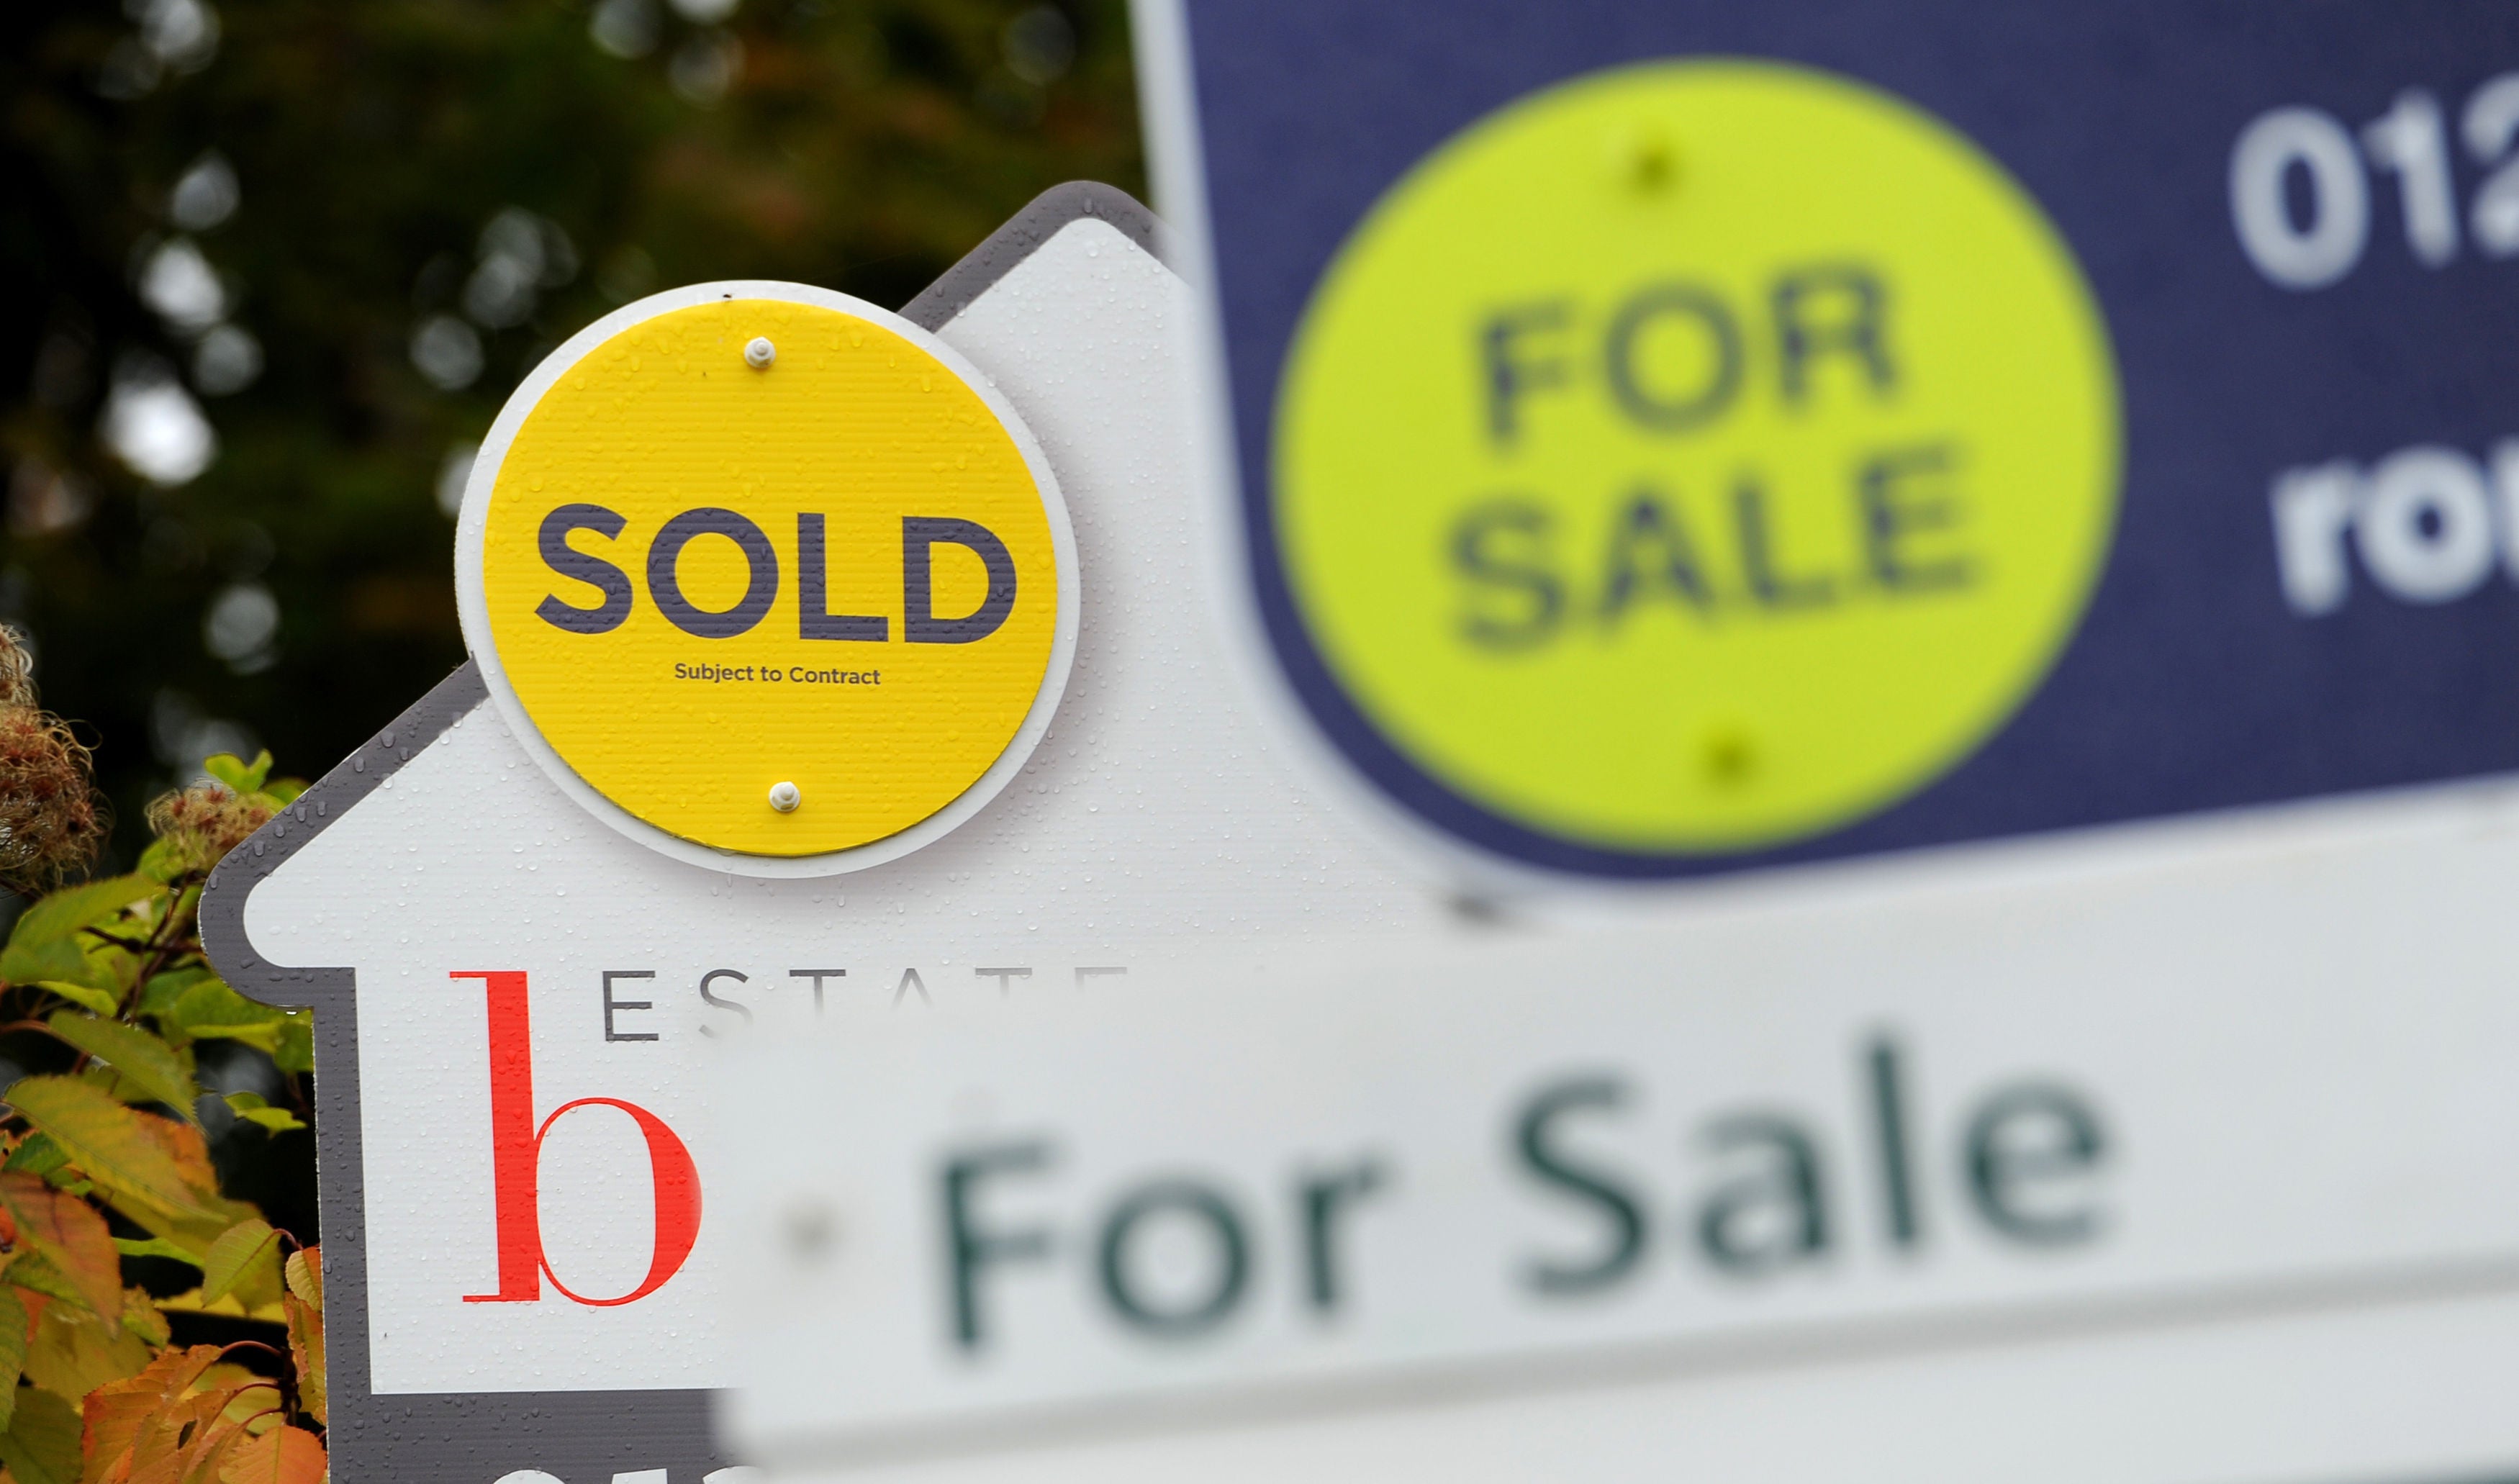 The Treasury will reportedly step in to boost the availabiity of low-deposit mortgages for first time buyers